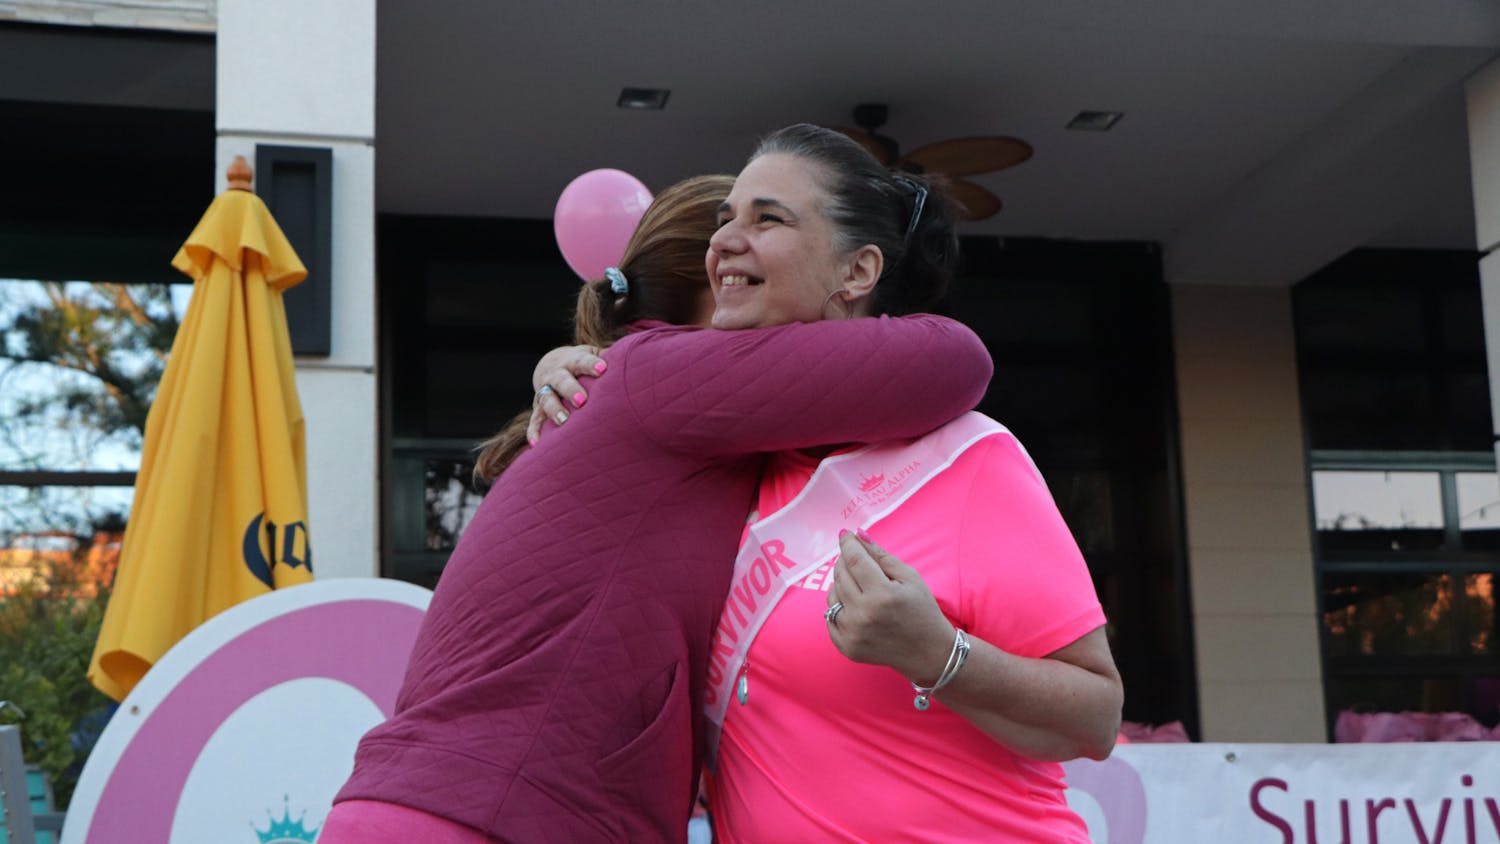 Jennifer McKathan (left), American Cancer Society health systems manager, embraces Pam Clevenger (right) after she receives a breast cancer survivor sash at the Making Strides Against Breast Cancer event in Celebration Pointe on Saturday, Oct. 23, 2021. Clevenger, survivor for 12 years, is also a UF Health cancer patient navigator. 